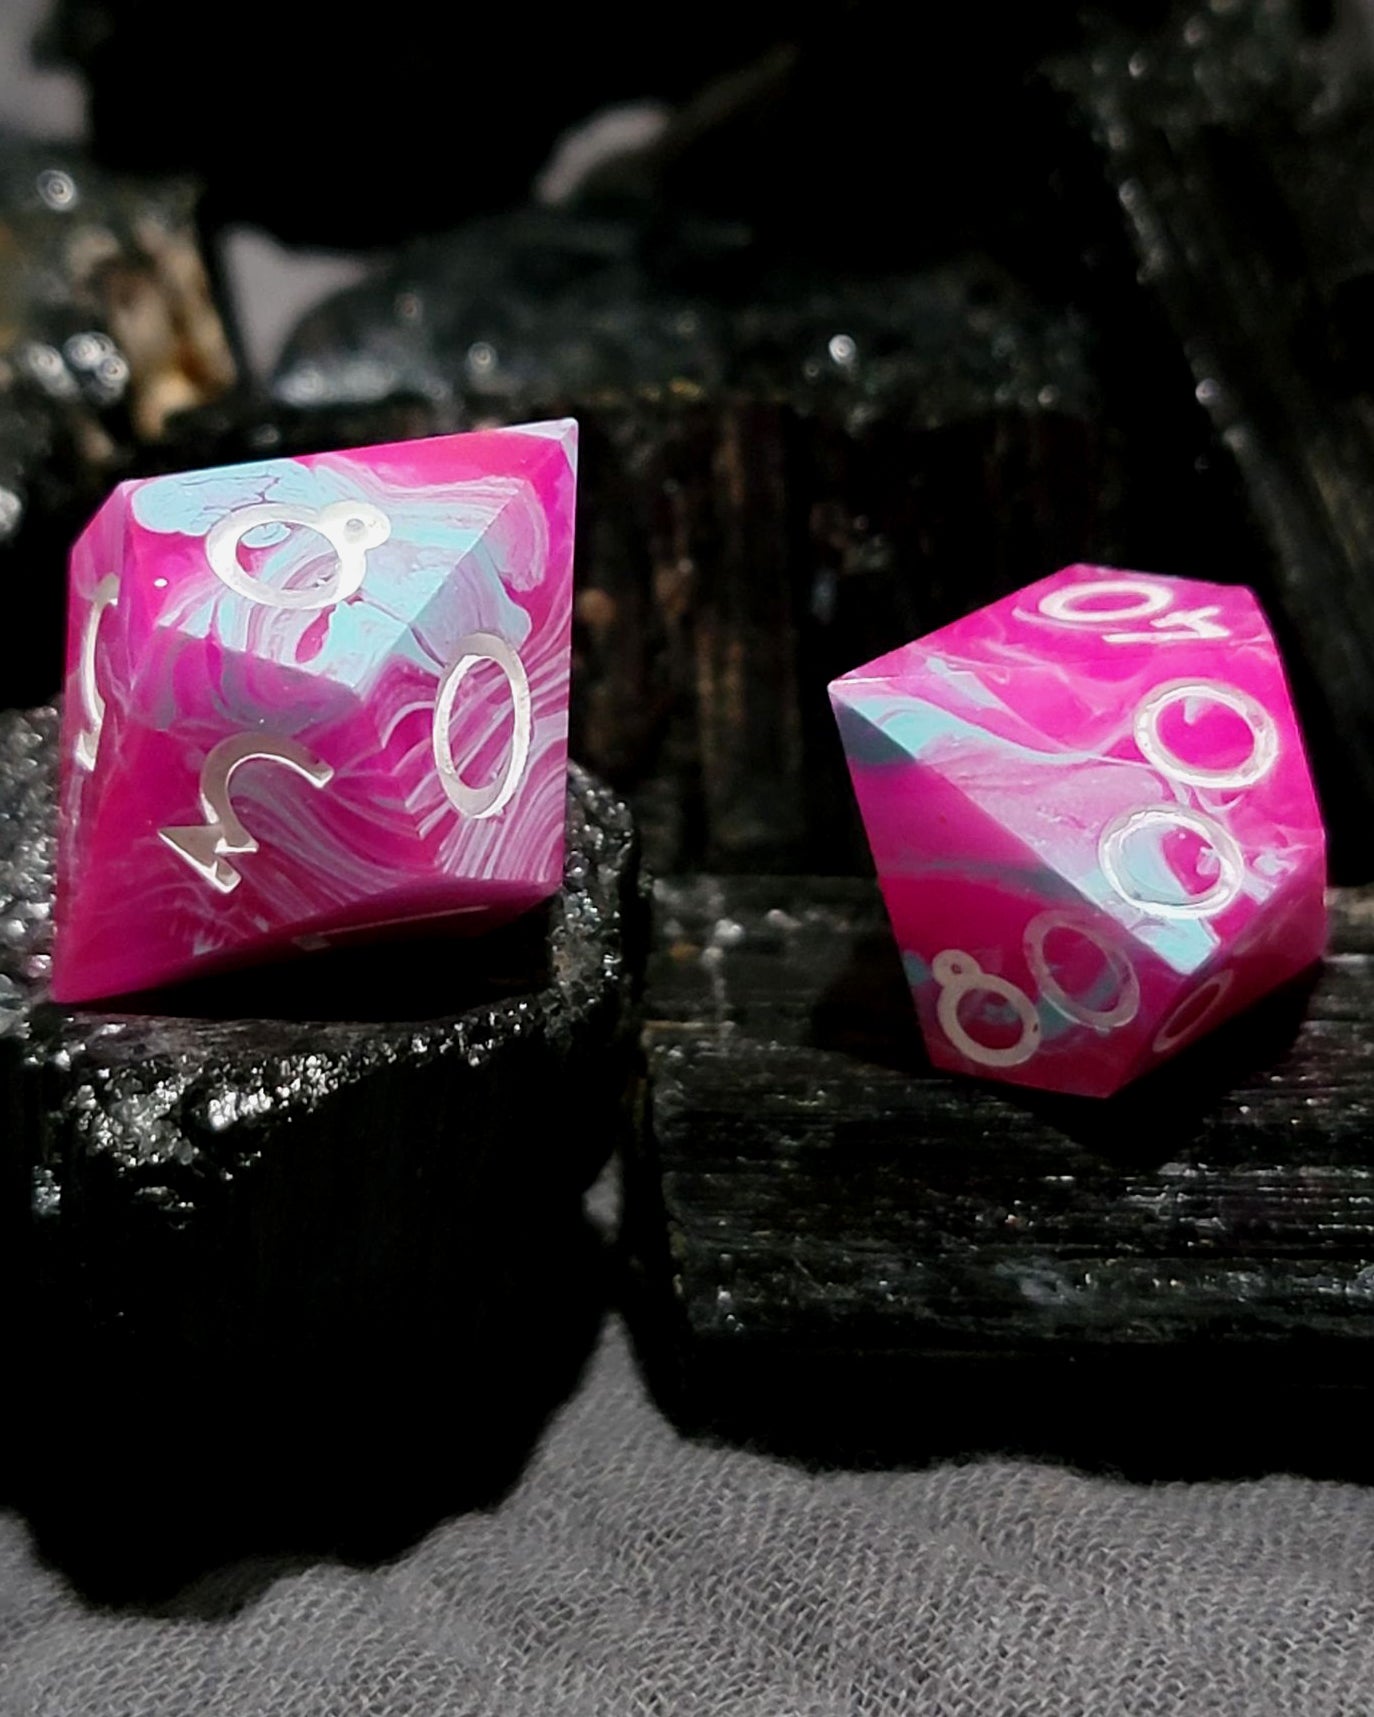 Bardic Dream UV reactive - 7 Piece handmade D&D Dice| Hand Crafted Dungeons and Dragons Dice